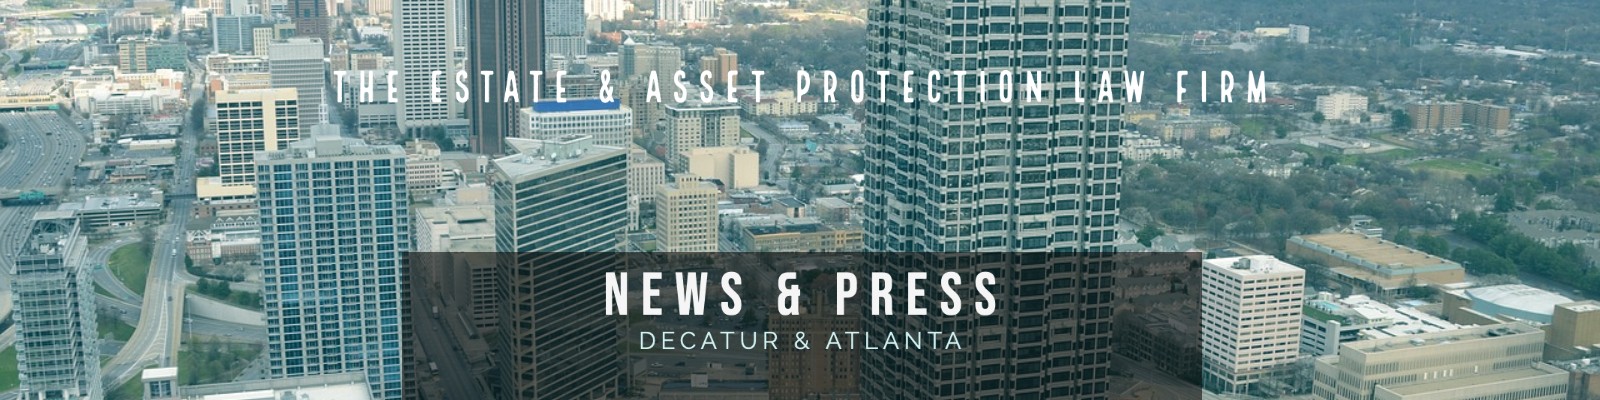 atlanta estate planning asset protection attorneys articles and information